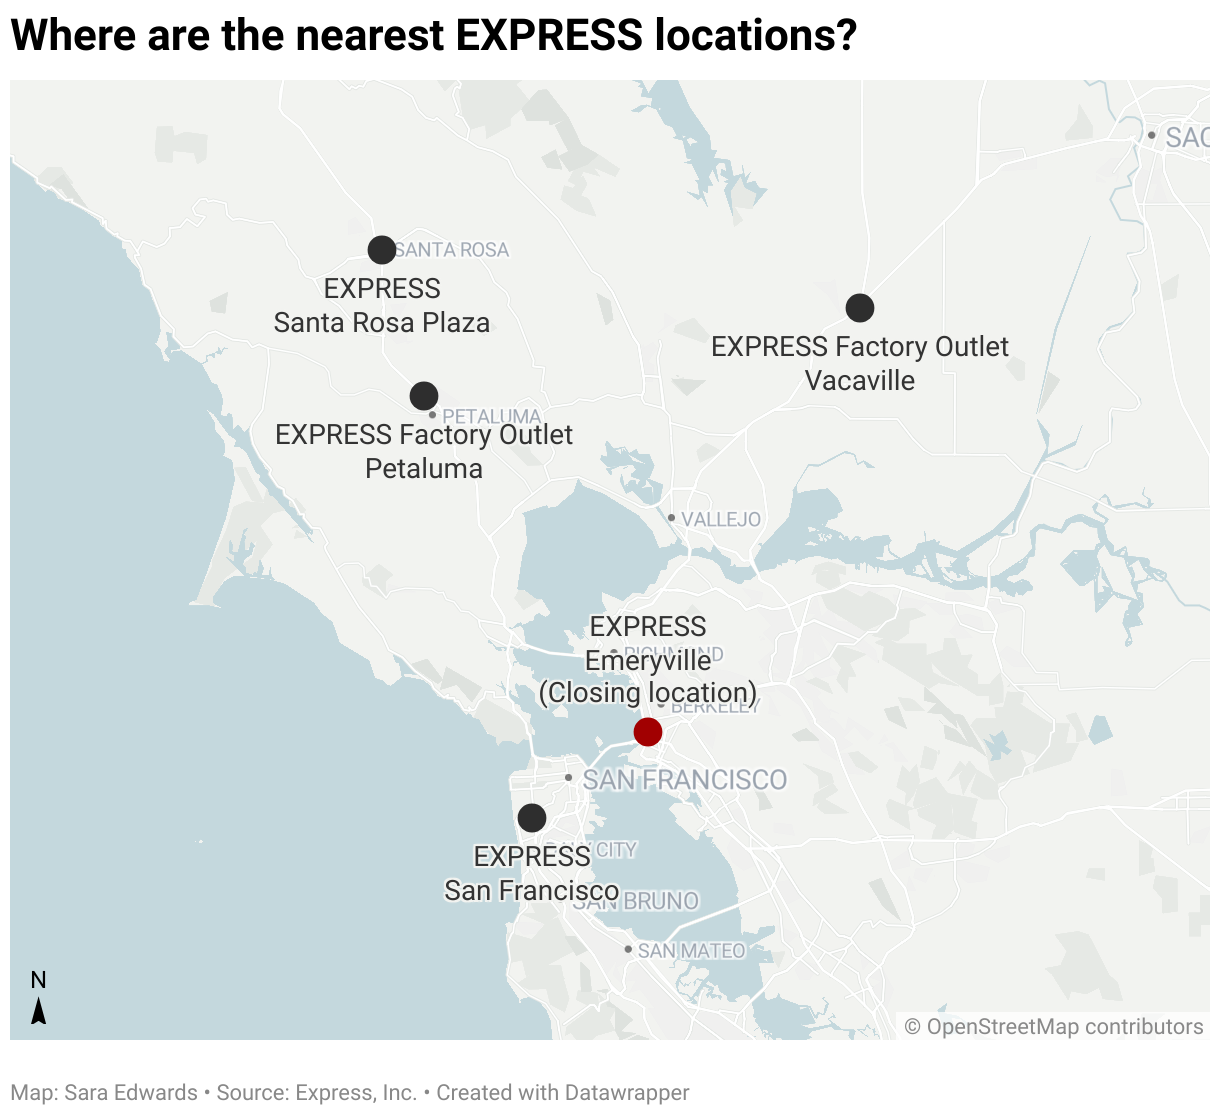 A gray chart with black and red points showing the locations of EXPRESS and EXPRESS Factory Outlet locations in the Bay Area.